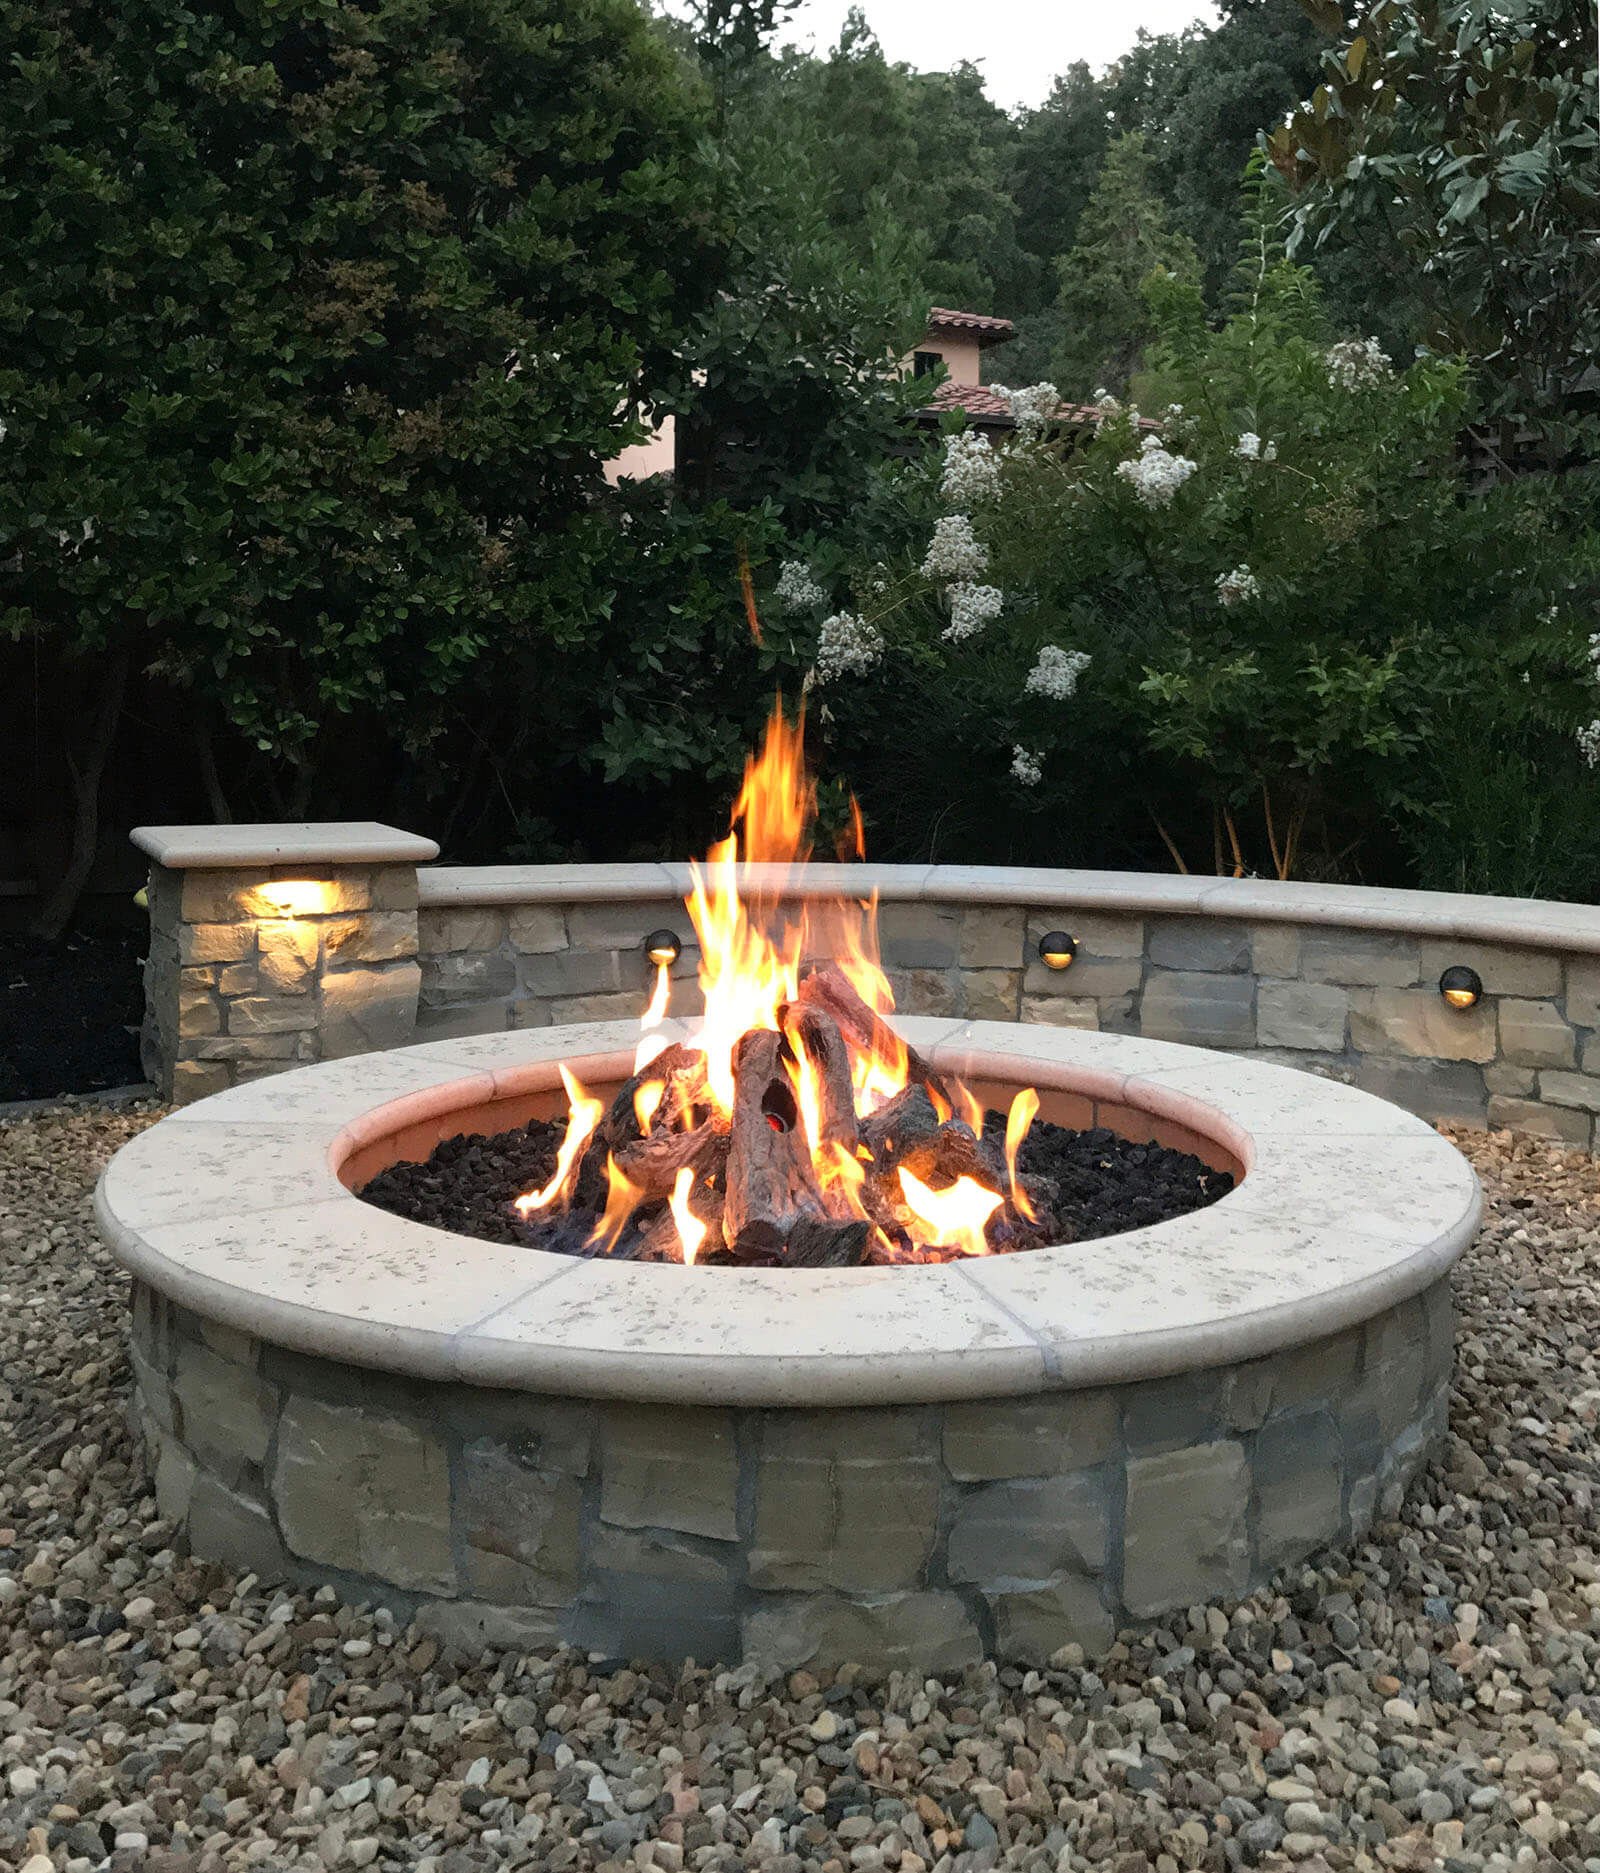 Rounded natural fireplace with stone bench and gravel surrounding area and stone walkway - Closeup shot